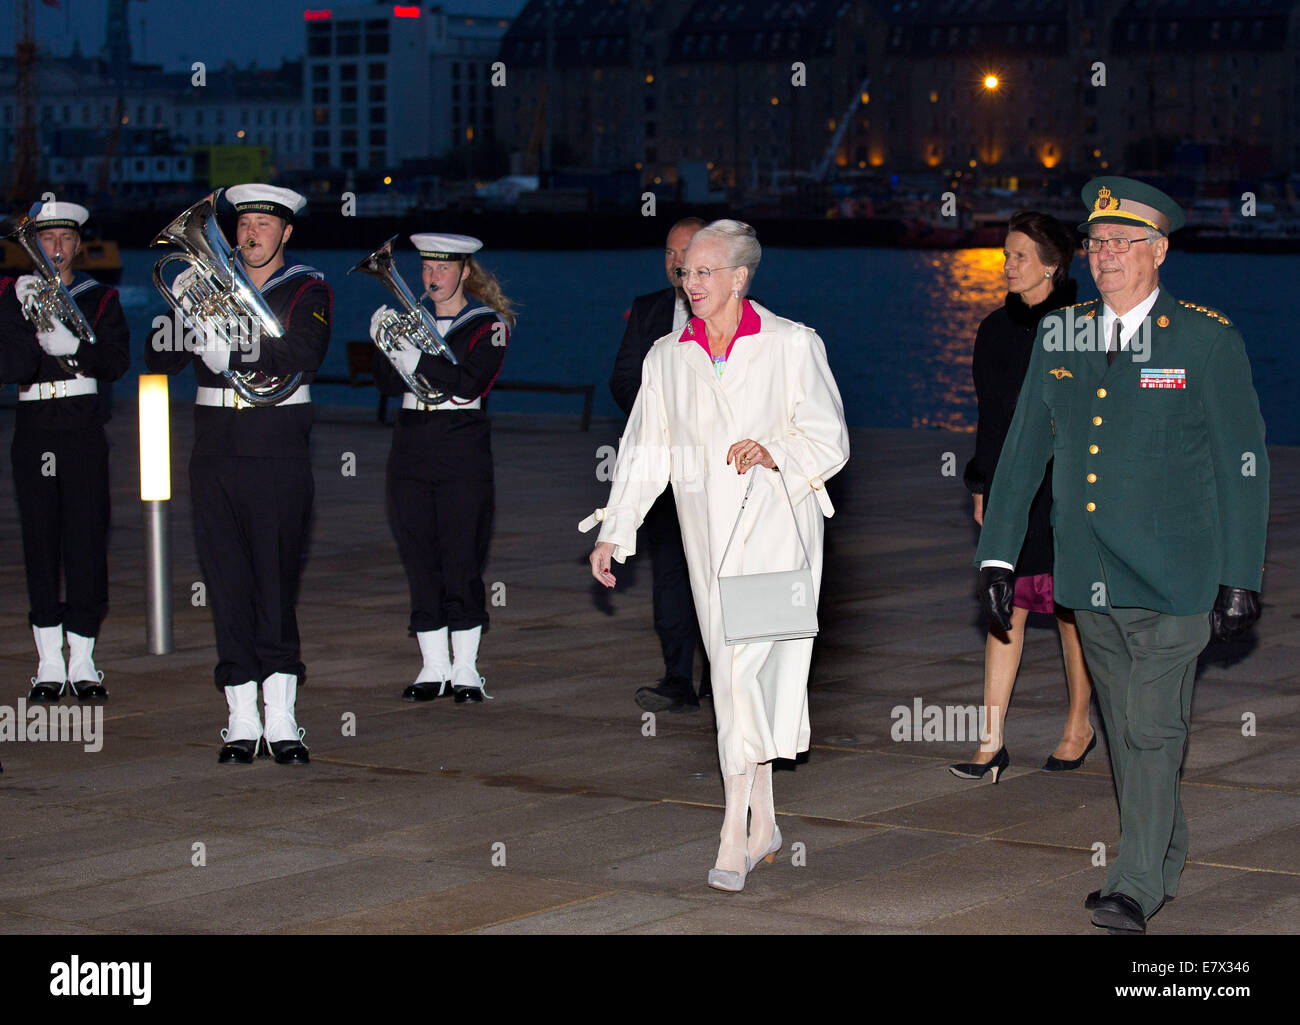 Queen Margrethe of Denmark, Prince Henrik and Princess Benedikte attend the 400th anniversary celebrations of the Danish Army at the Opera House in Copenhagen, 24 September 2014. Photo: Patrick van Katwijk/ NO WIRE SERVICE Stock Photo